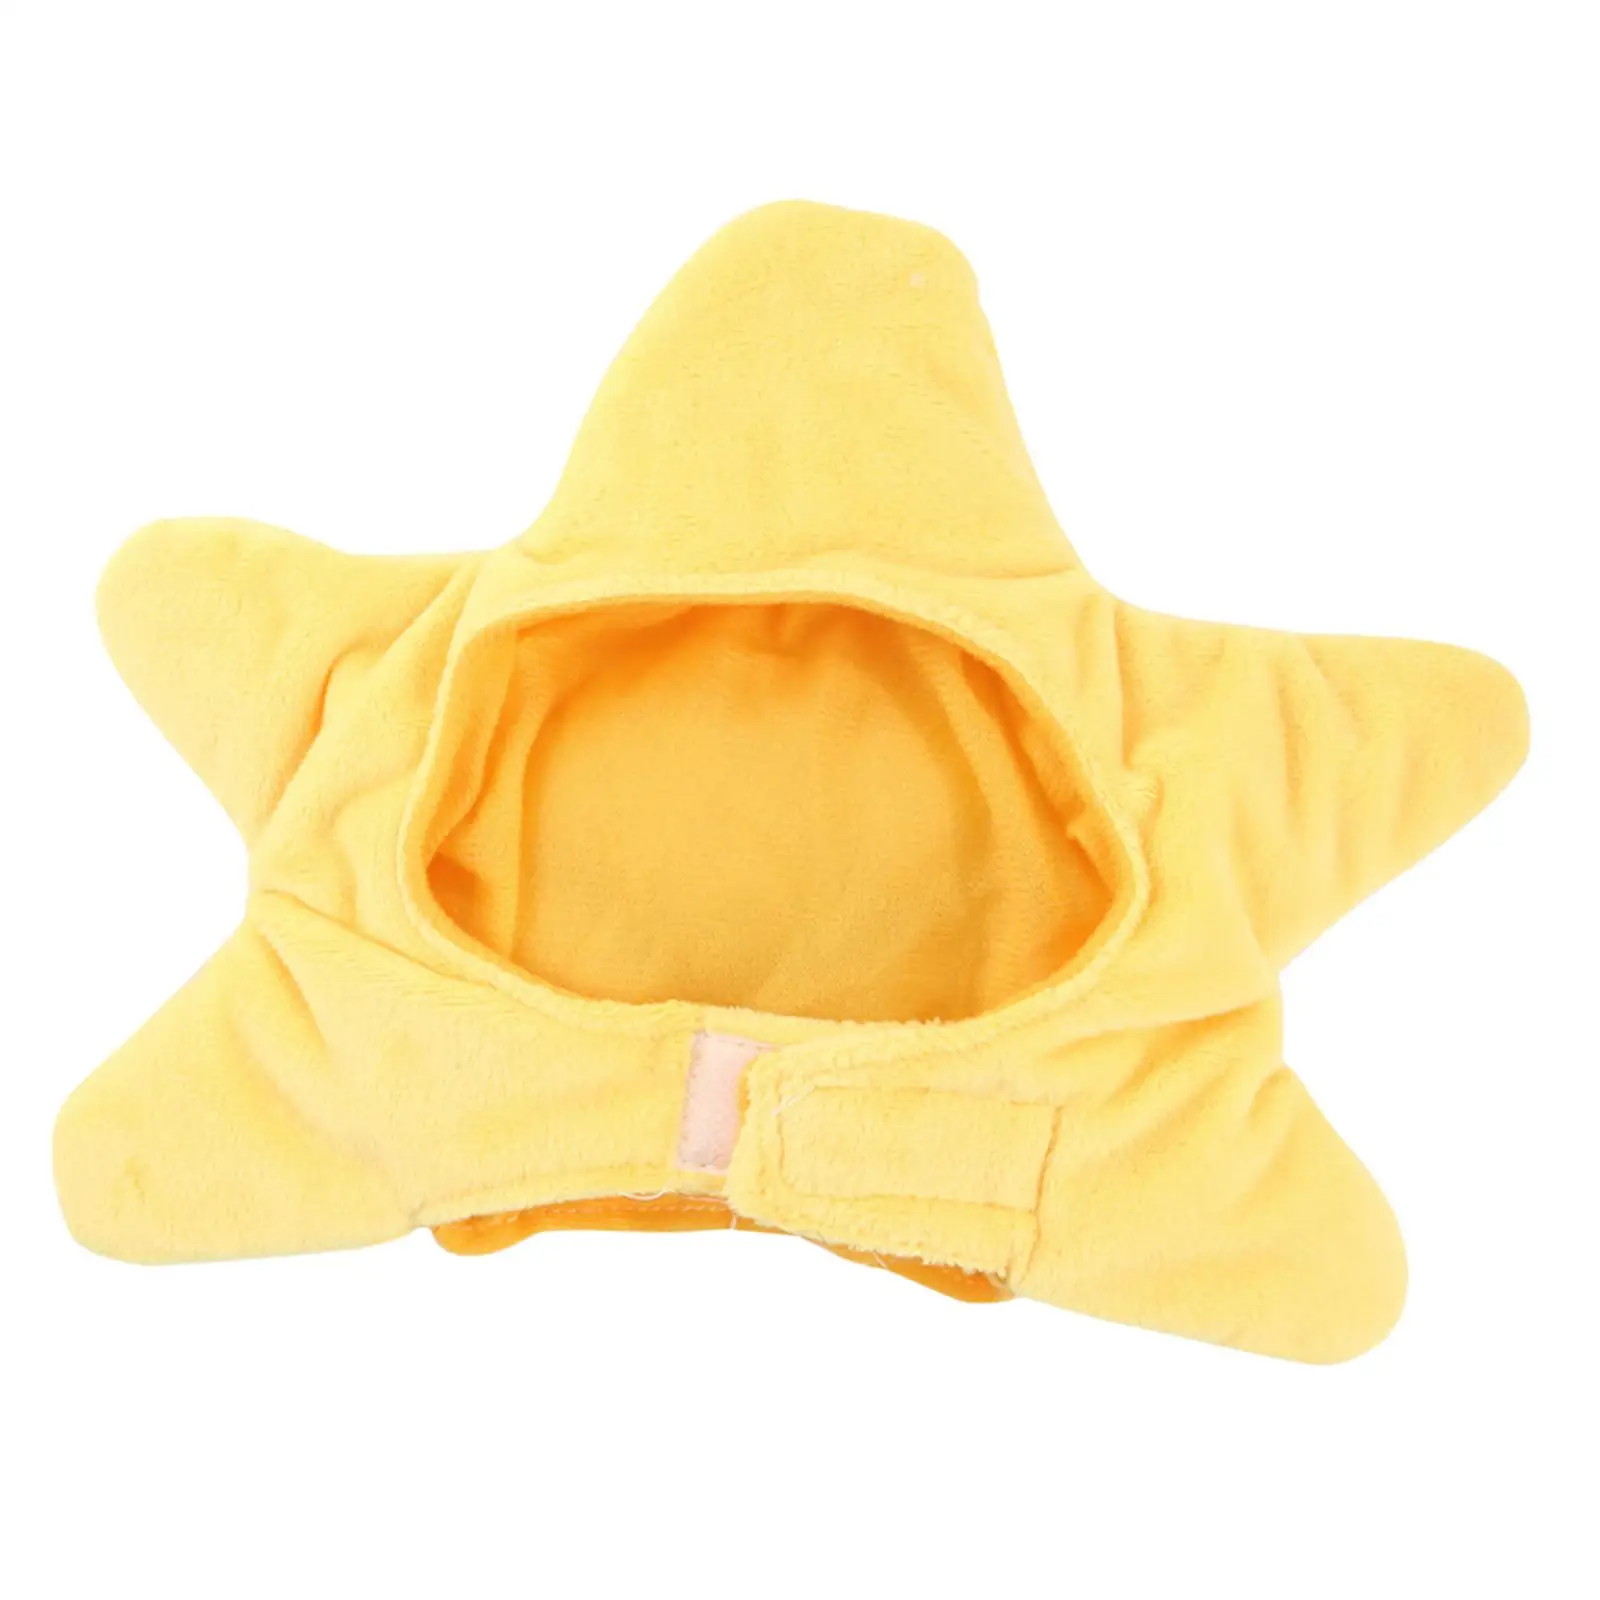 Cat Hat Yellow Shaped Plush Headwear Cap Adorable for Small Dogs Festival Theme Party Dress up